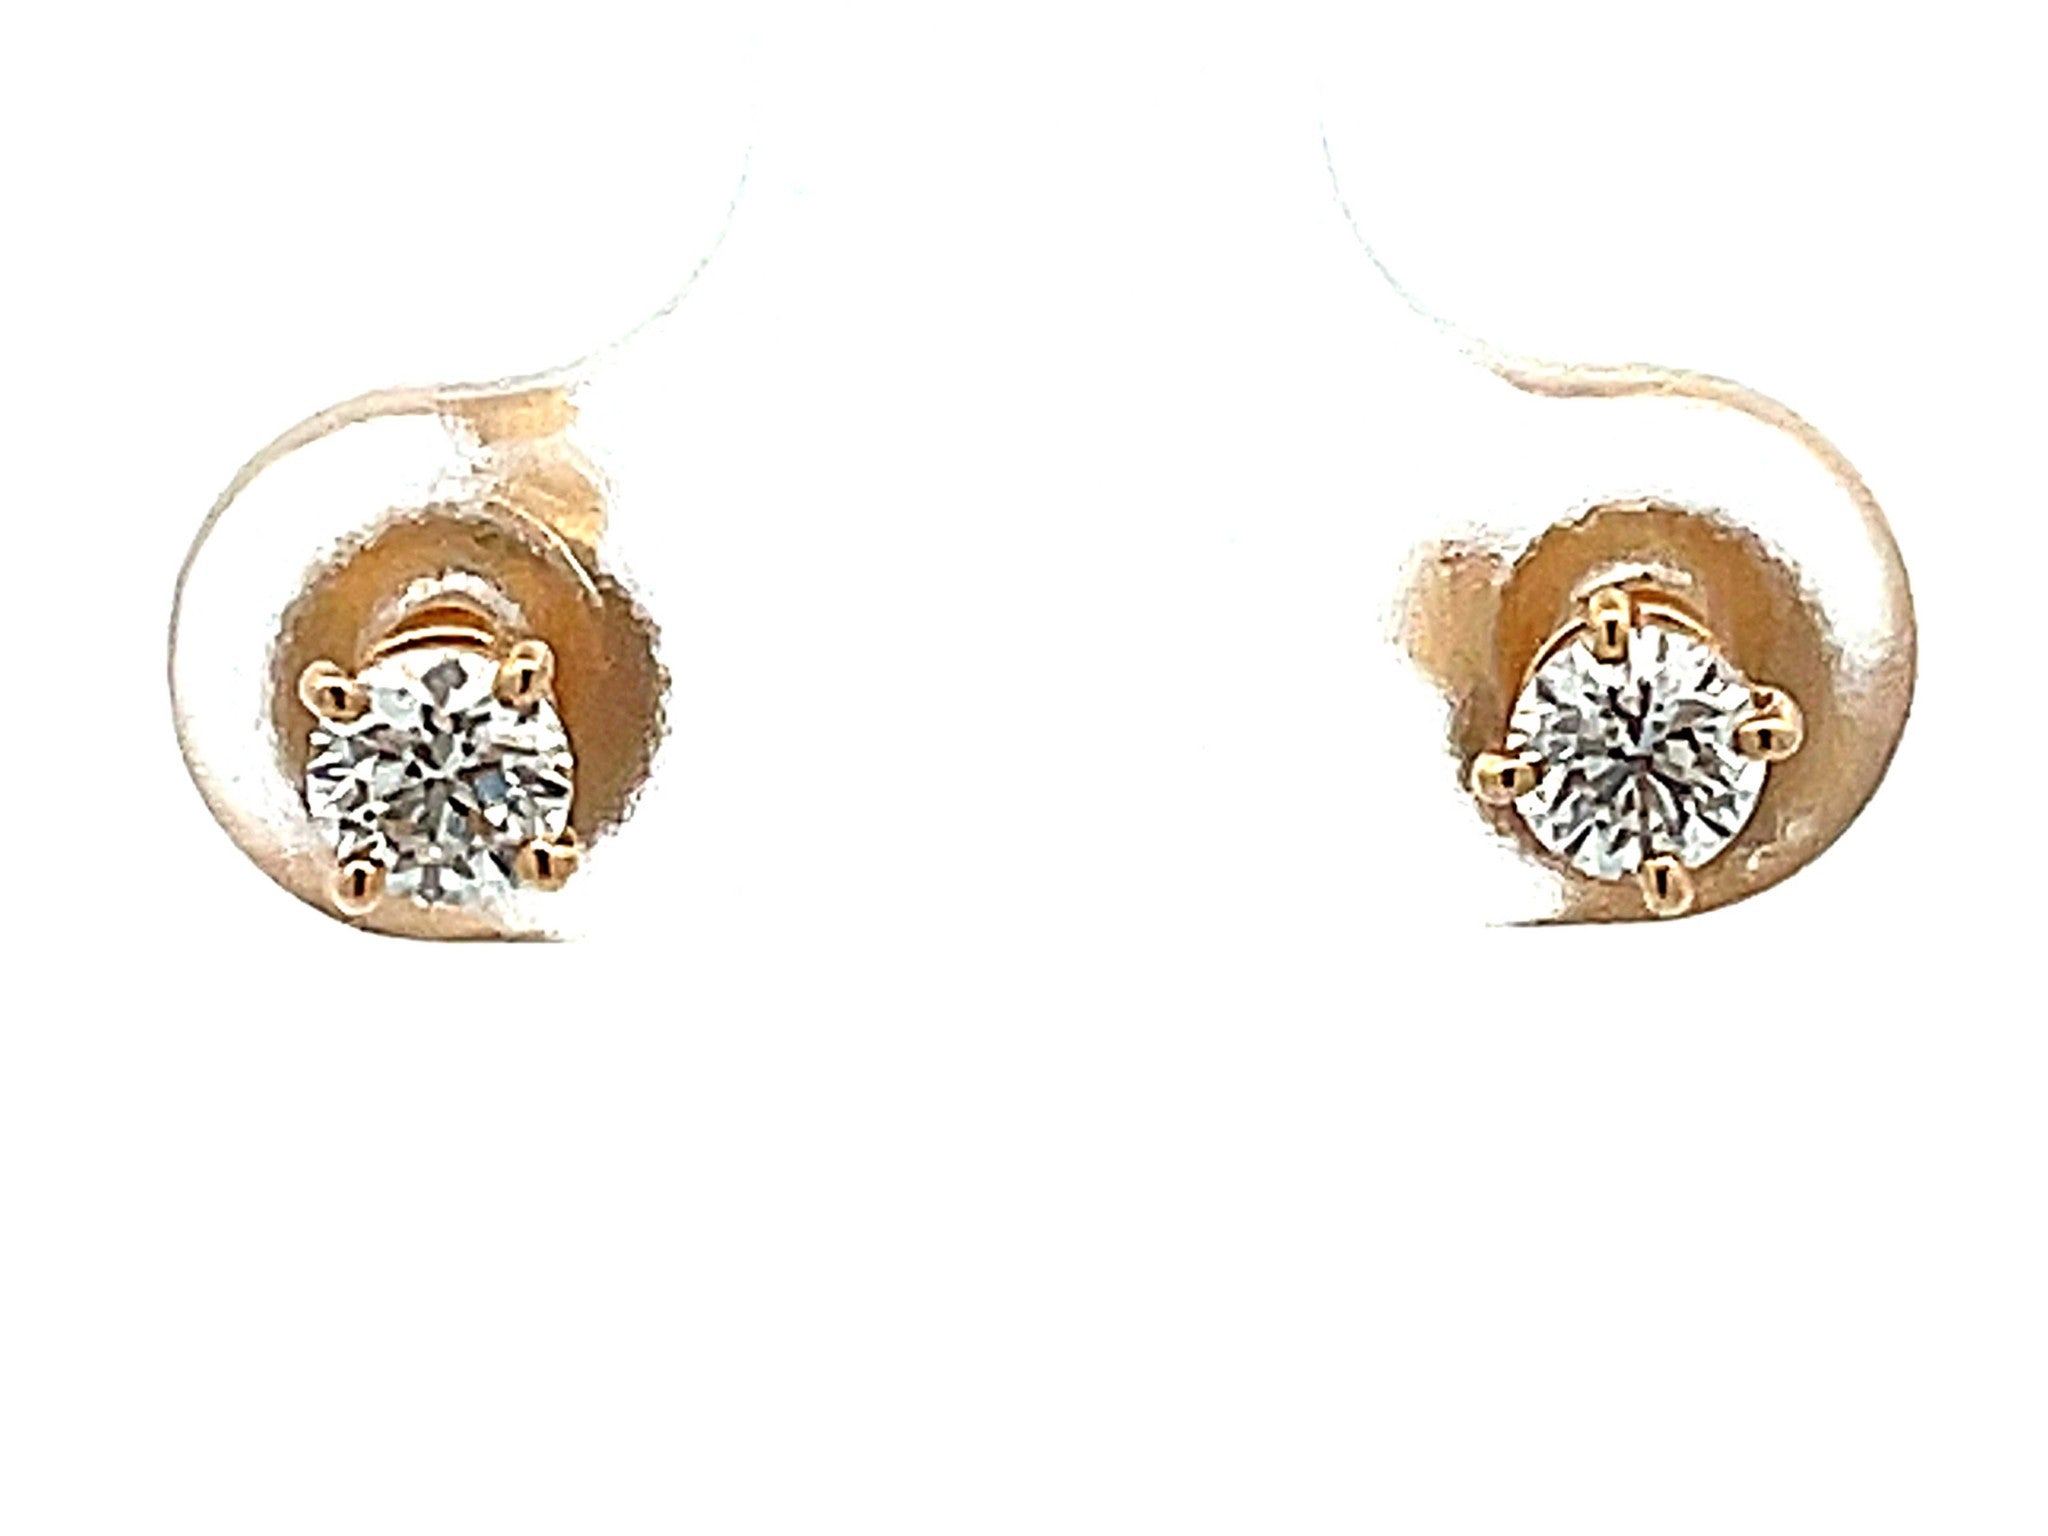 Tiffany Solitaire Diamond Stud Earrings in 18k Yellow Gold 0.34 ct